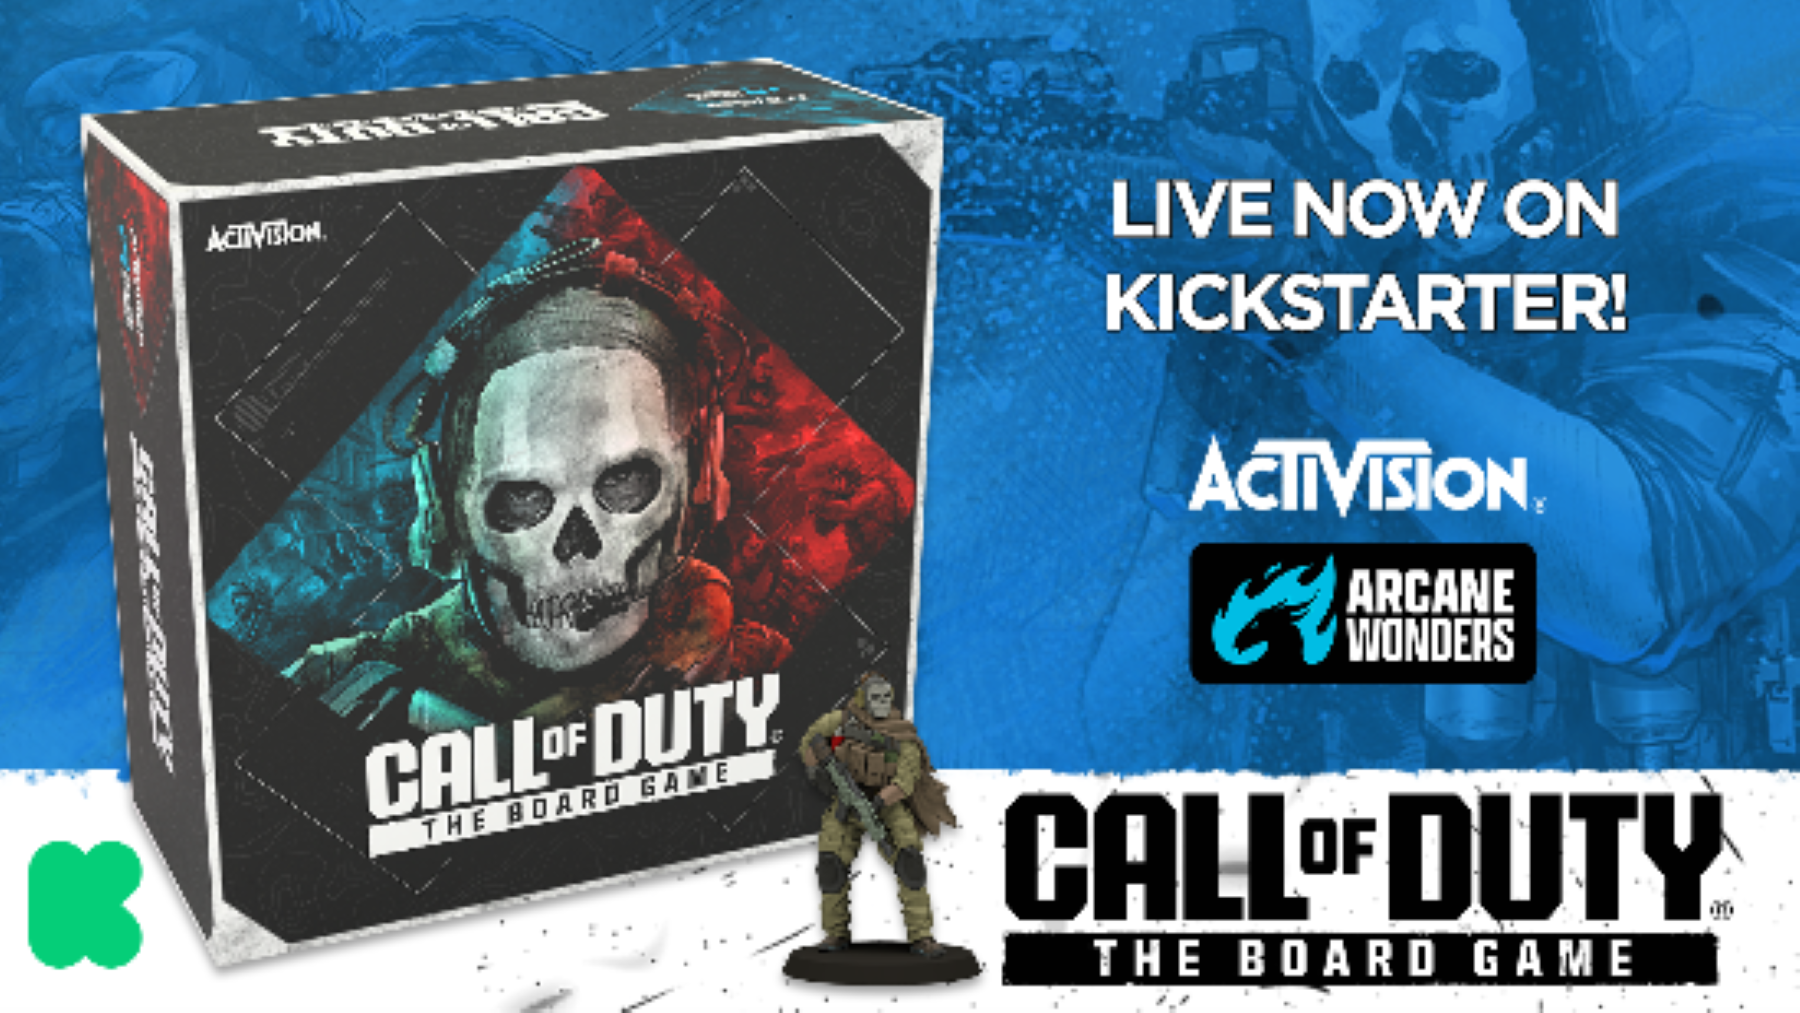 Call of Duty: The Board Game Seizes Success, Airdrops New Content and Rewards